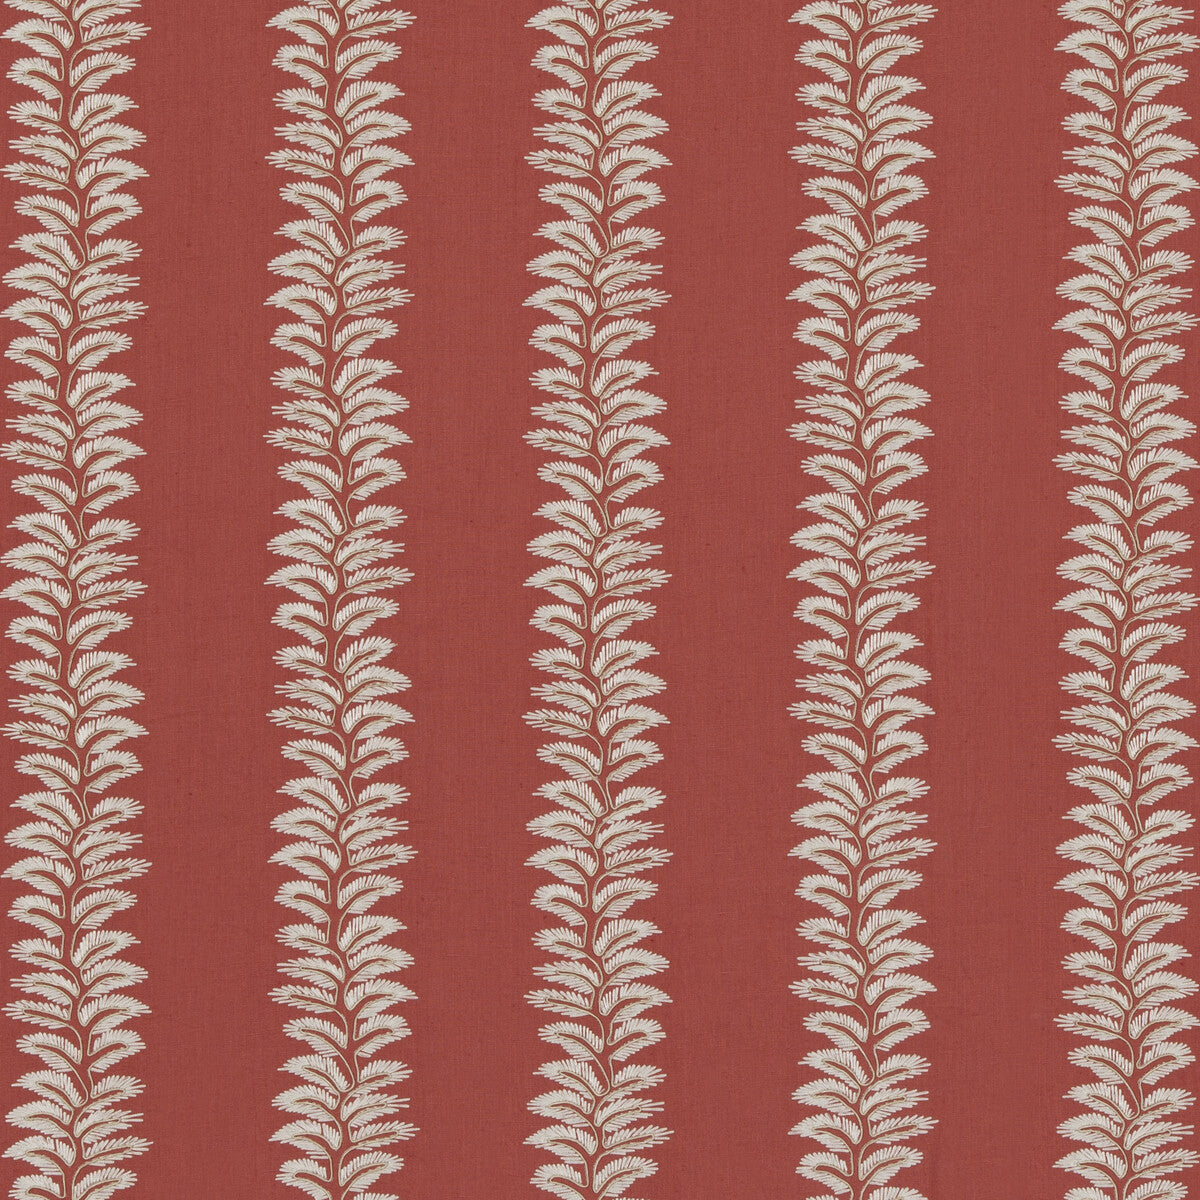 New Bradbourne fabric in coral color - pattern BF10946.310.0 - by G P &amp; J Baker in the Ashmore collection